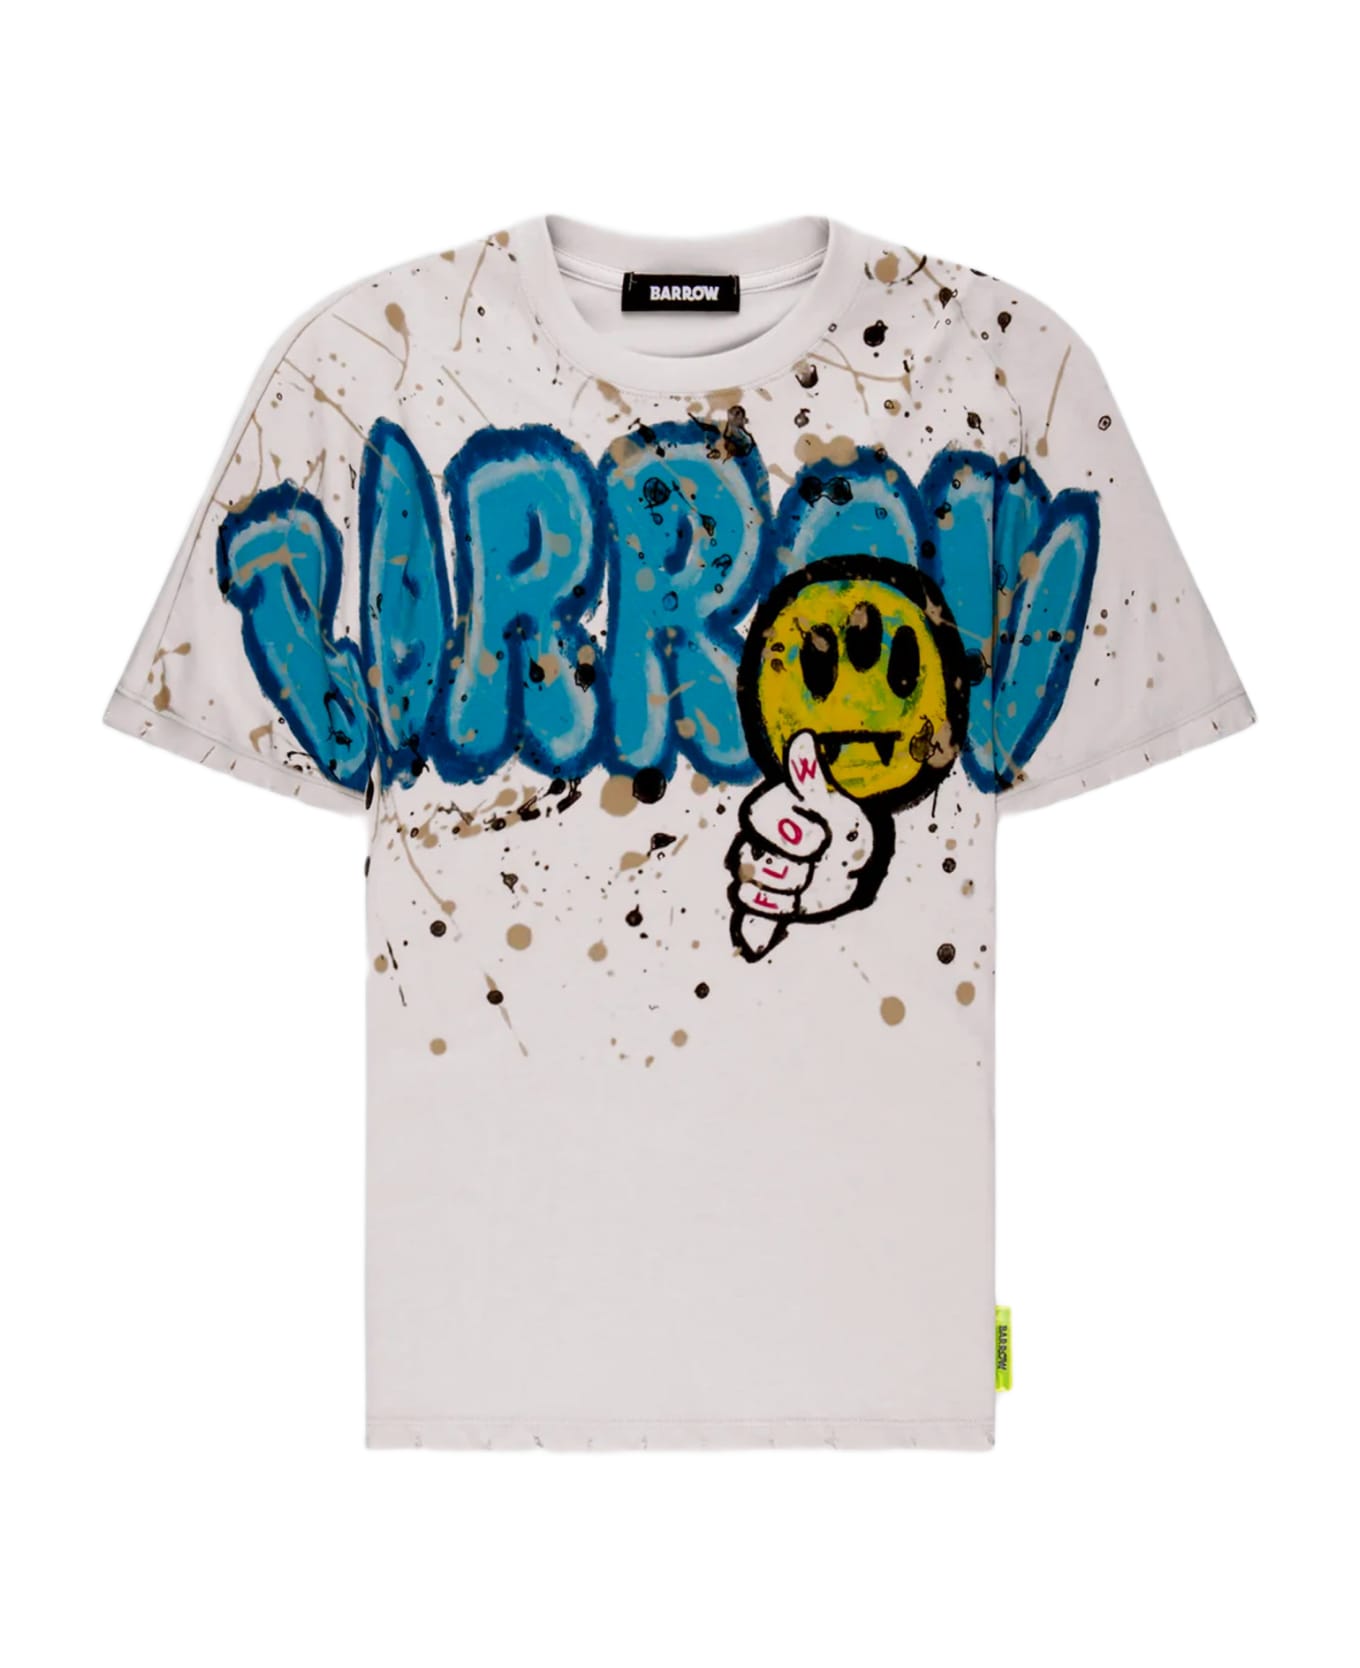 Barrow Jersey T-shirt Unisex Off White Cotton T-shirt With Graffiti Logo And Smile Print - Bianco Tシャツ